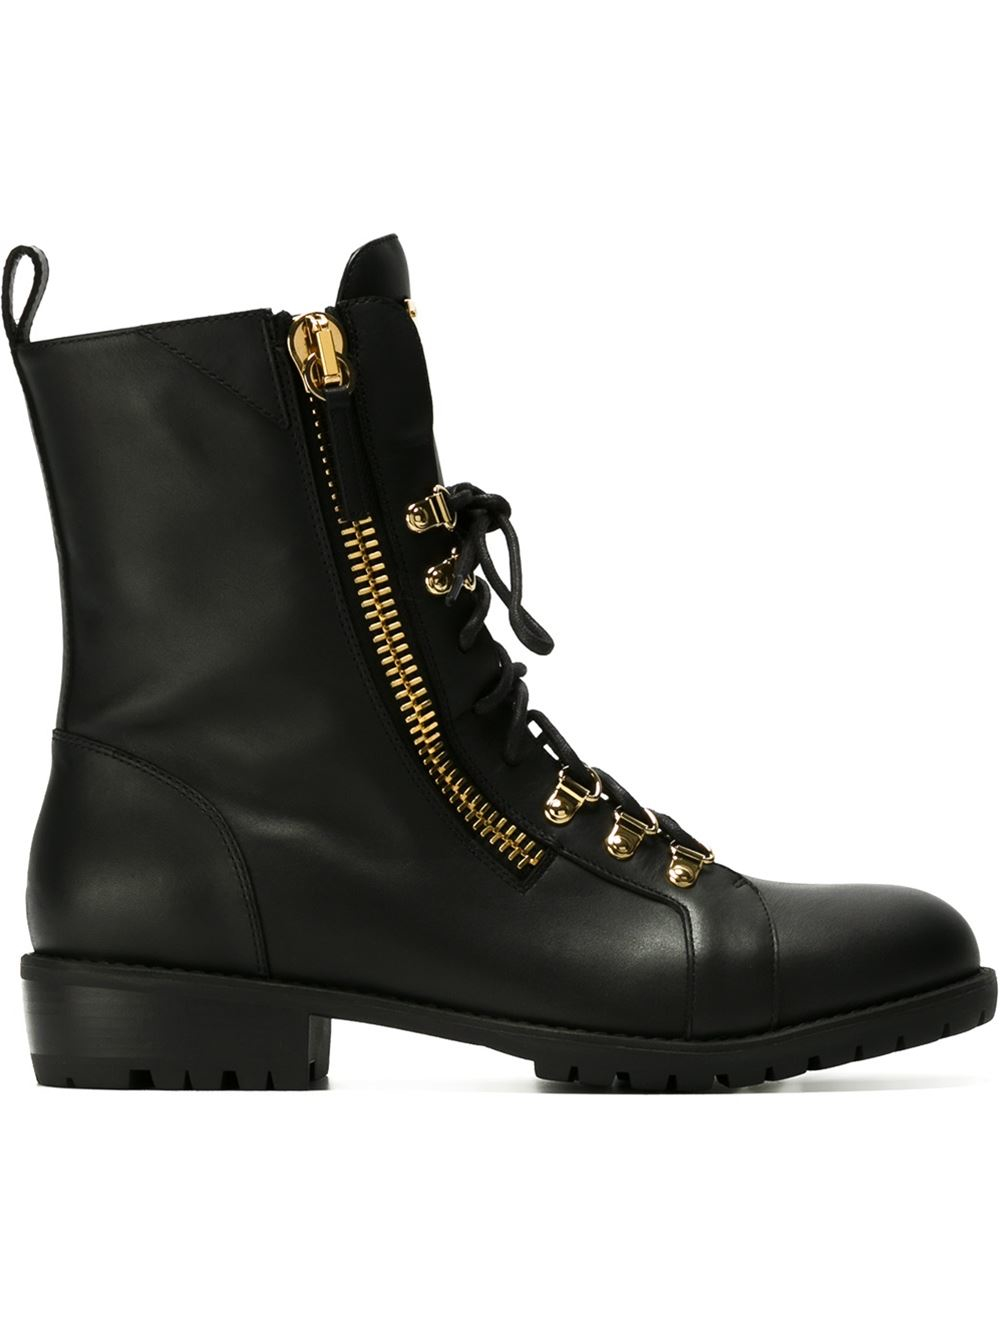 Lyst - Giuseppe Zanotti Lace-up Boots in Black for Men